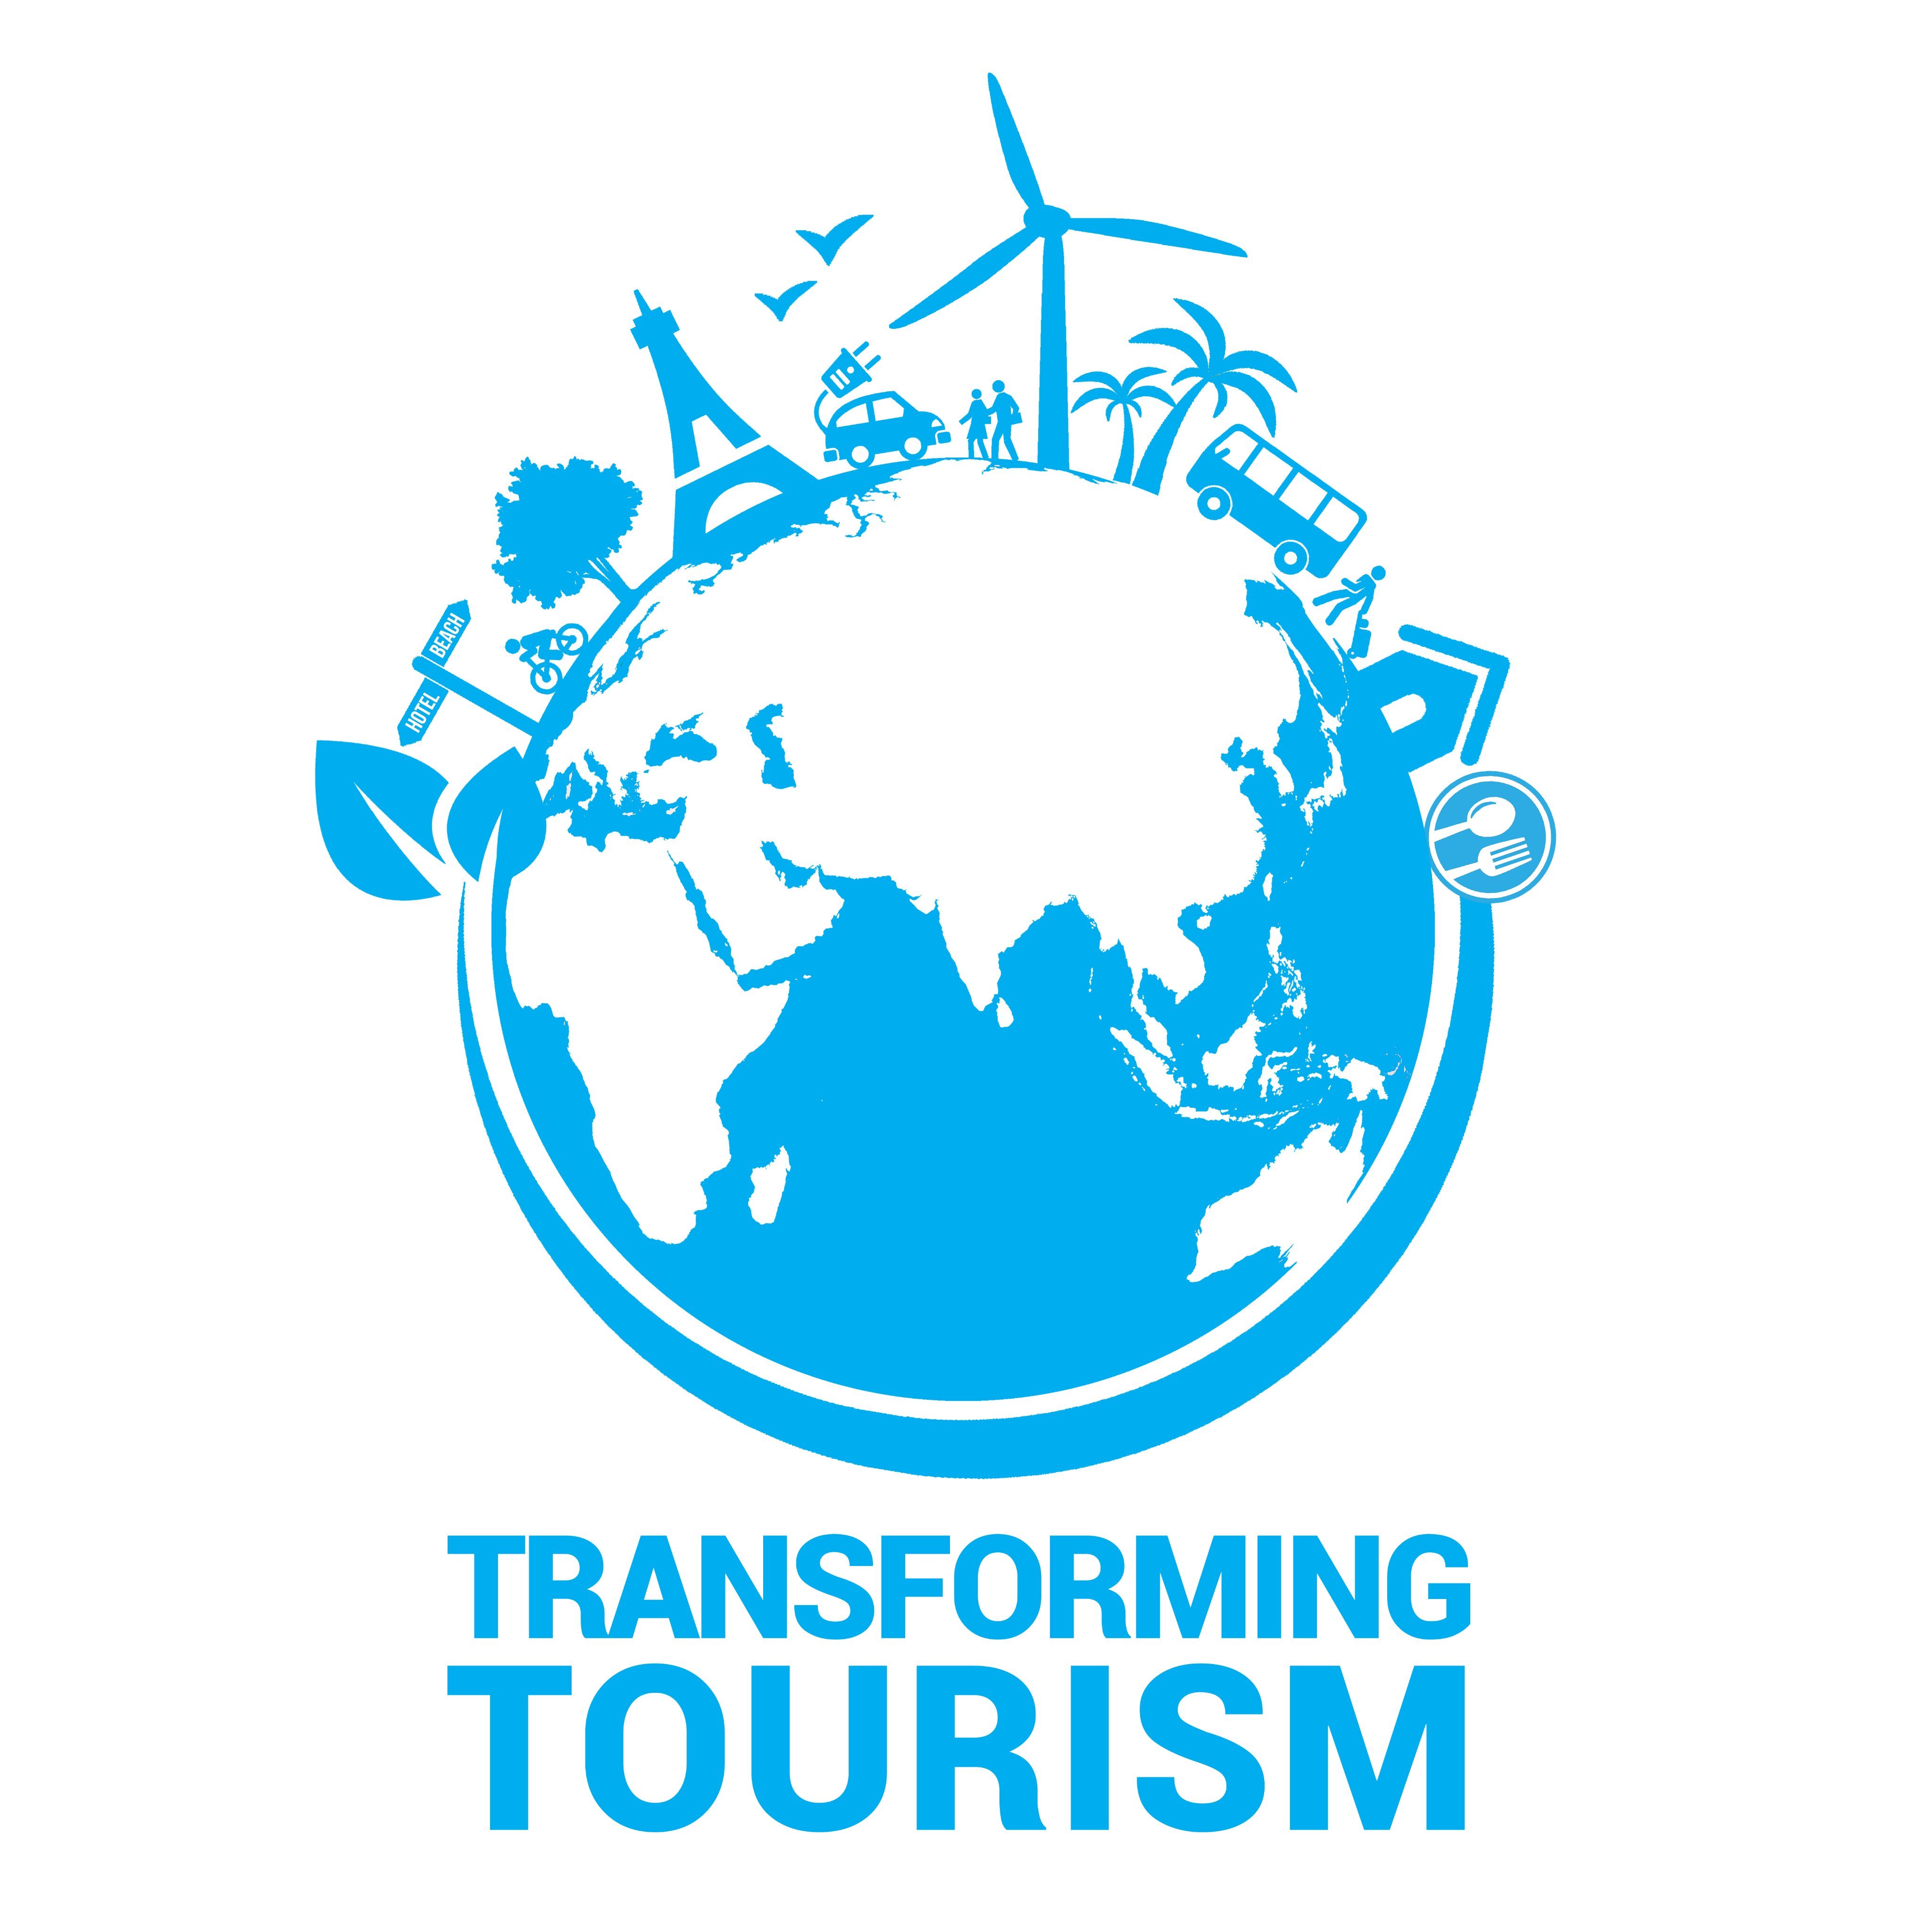 Transforming Tourism Value Chains in developing countries and small island developing states to accelerate more resource efficient, low carbon development.